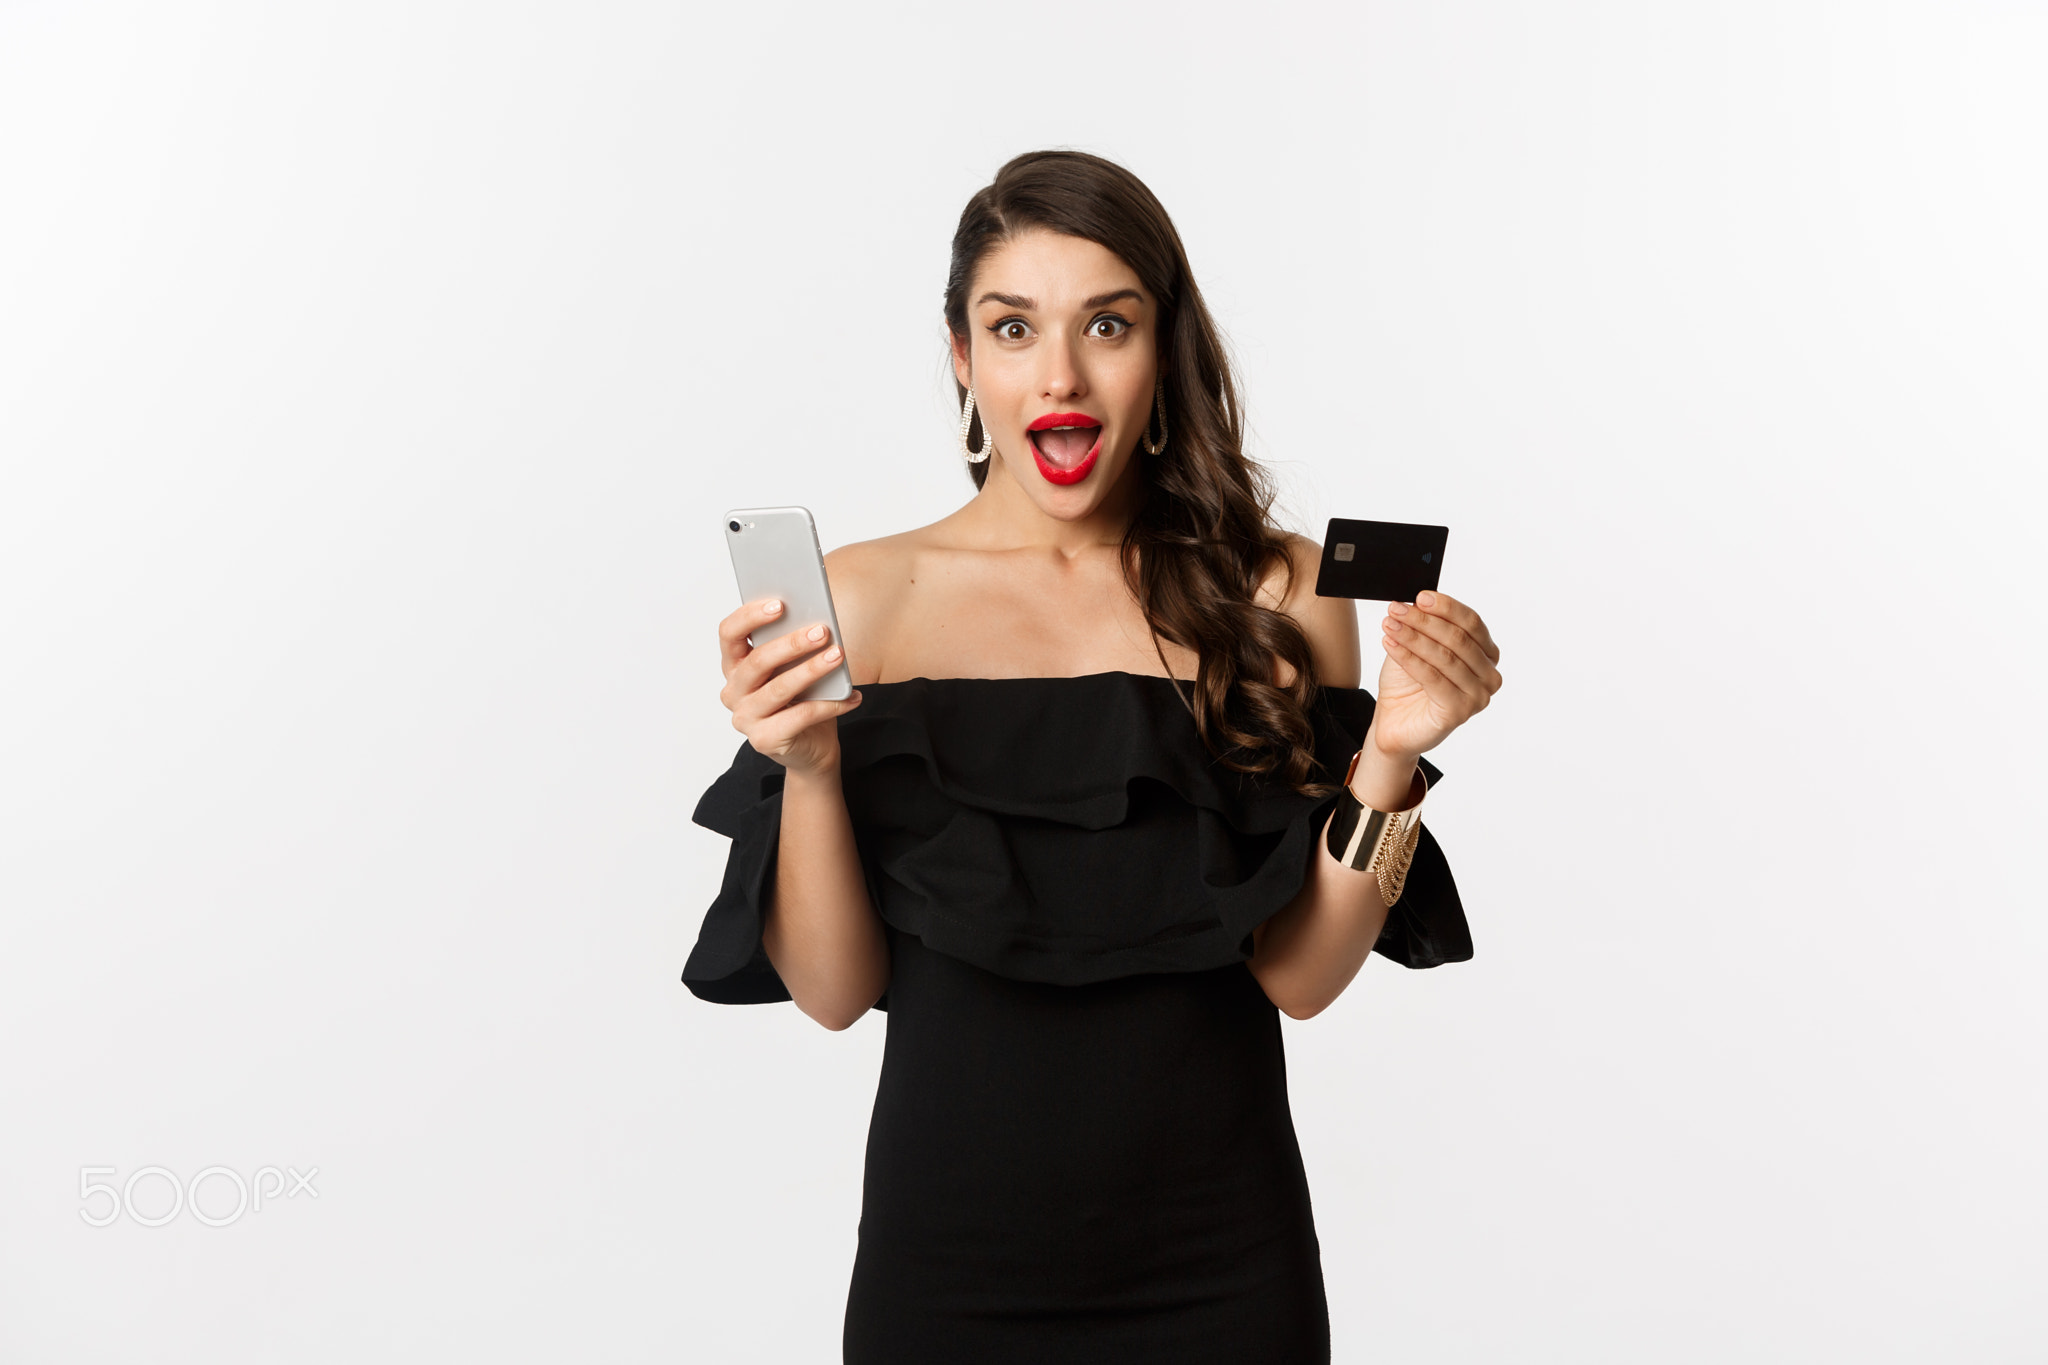 Online shopping concept. Fashionable woman in black dress, holding